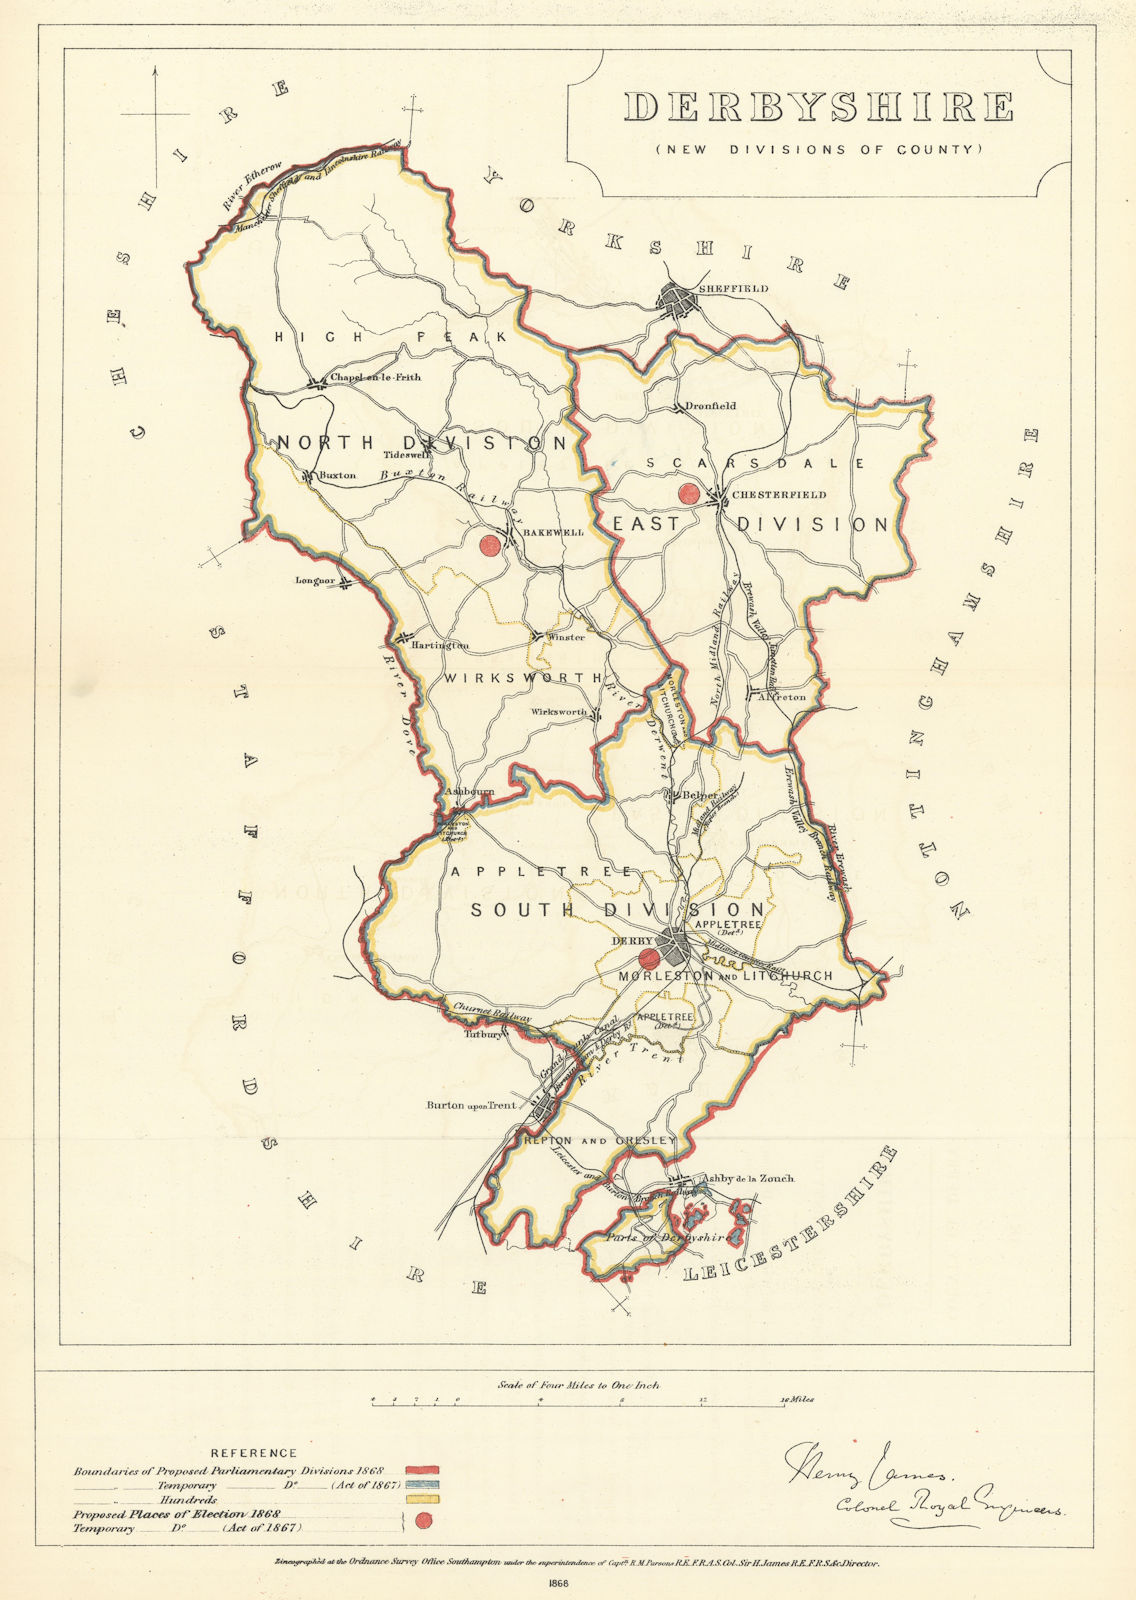 Derbyshire (New divisions of County). JAMES. Boundary Commission 1868 old map